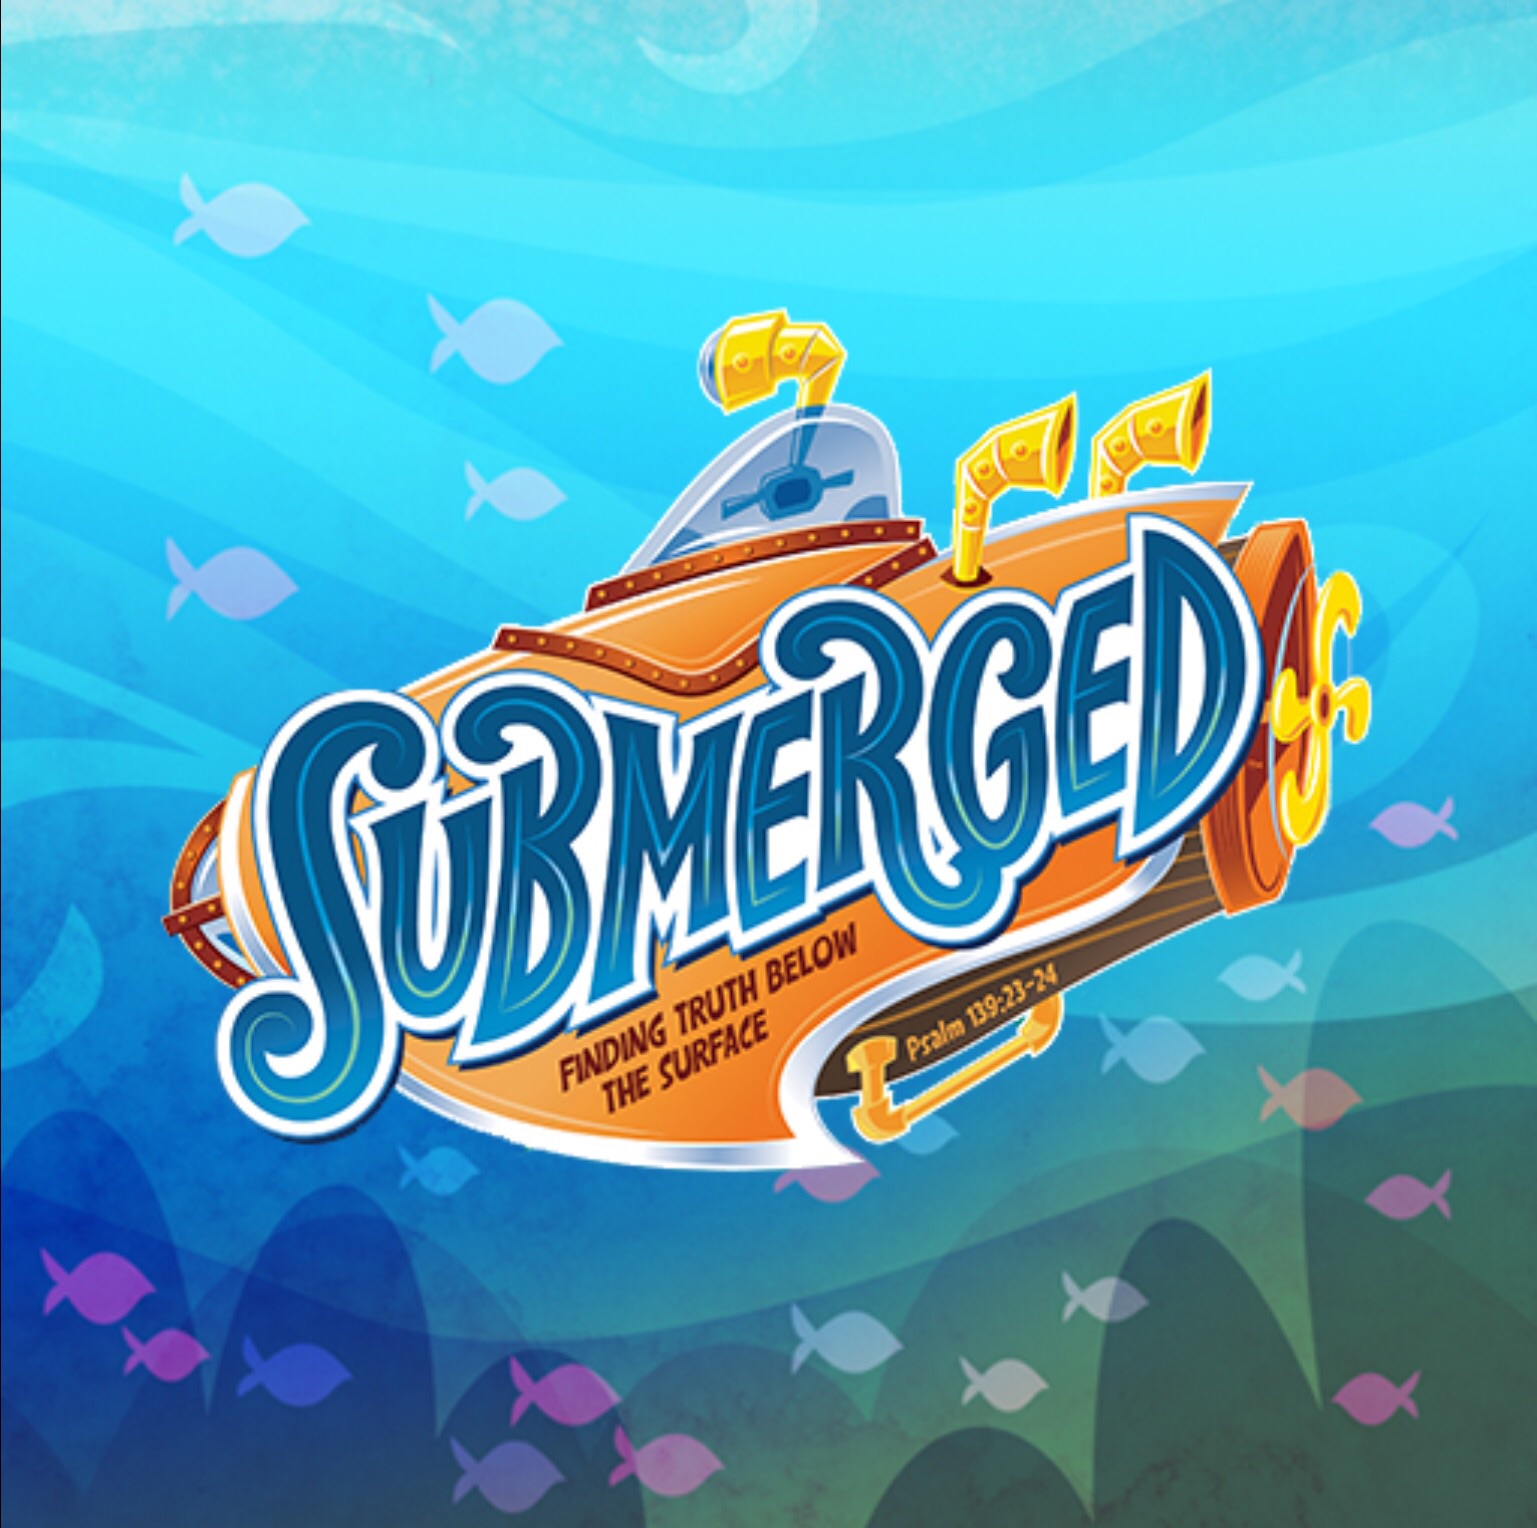 VBS 2016 at First Southern Baptist Church of Grandview - Submerged 2016